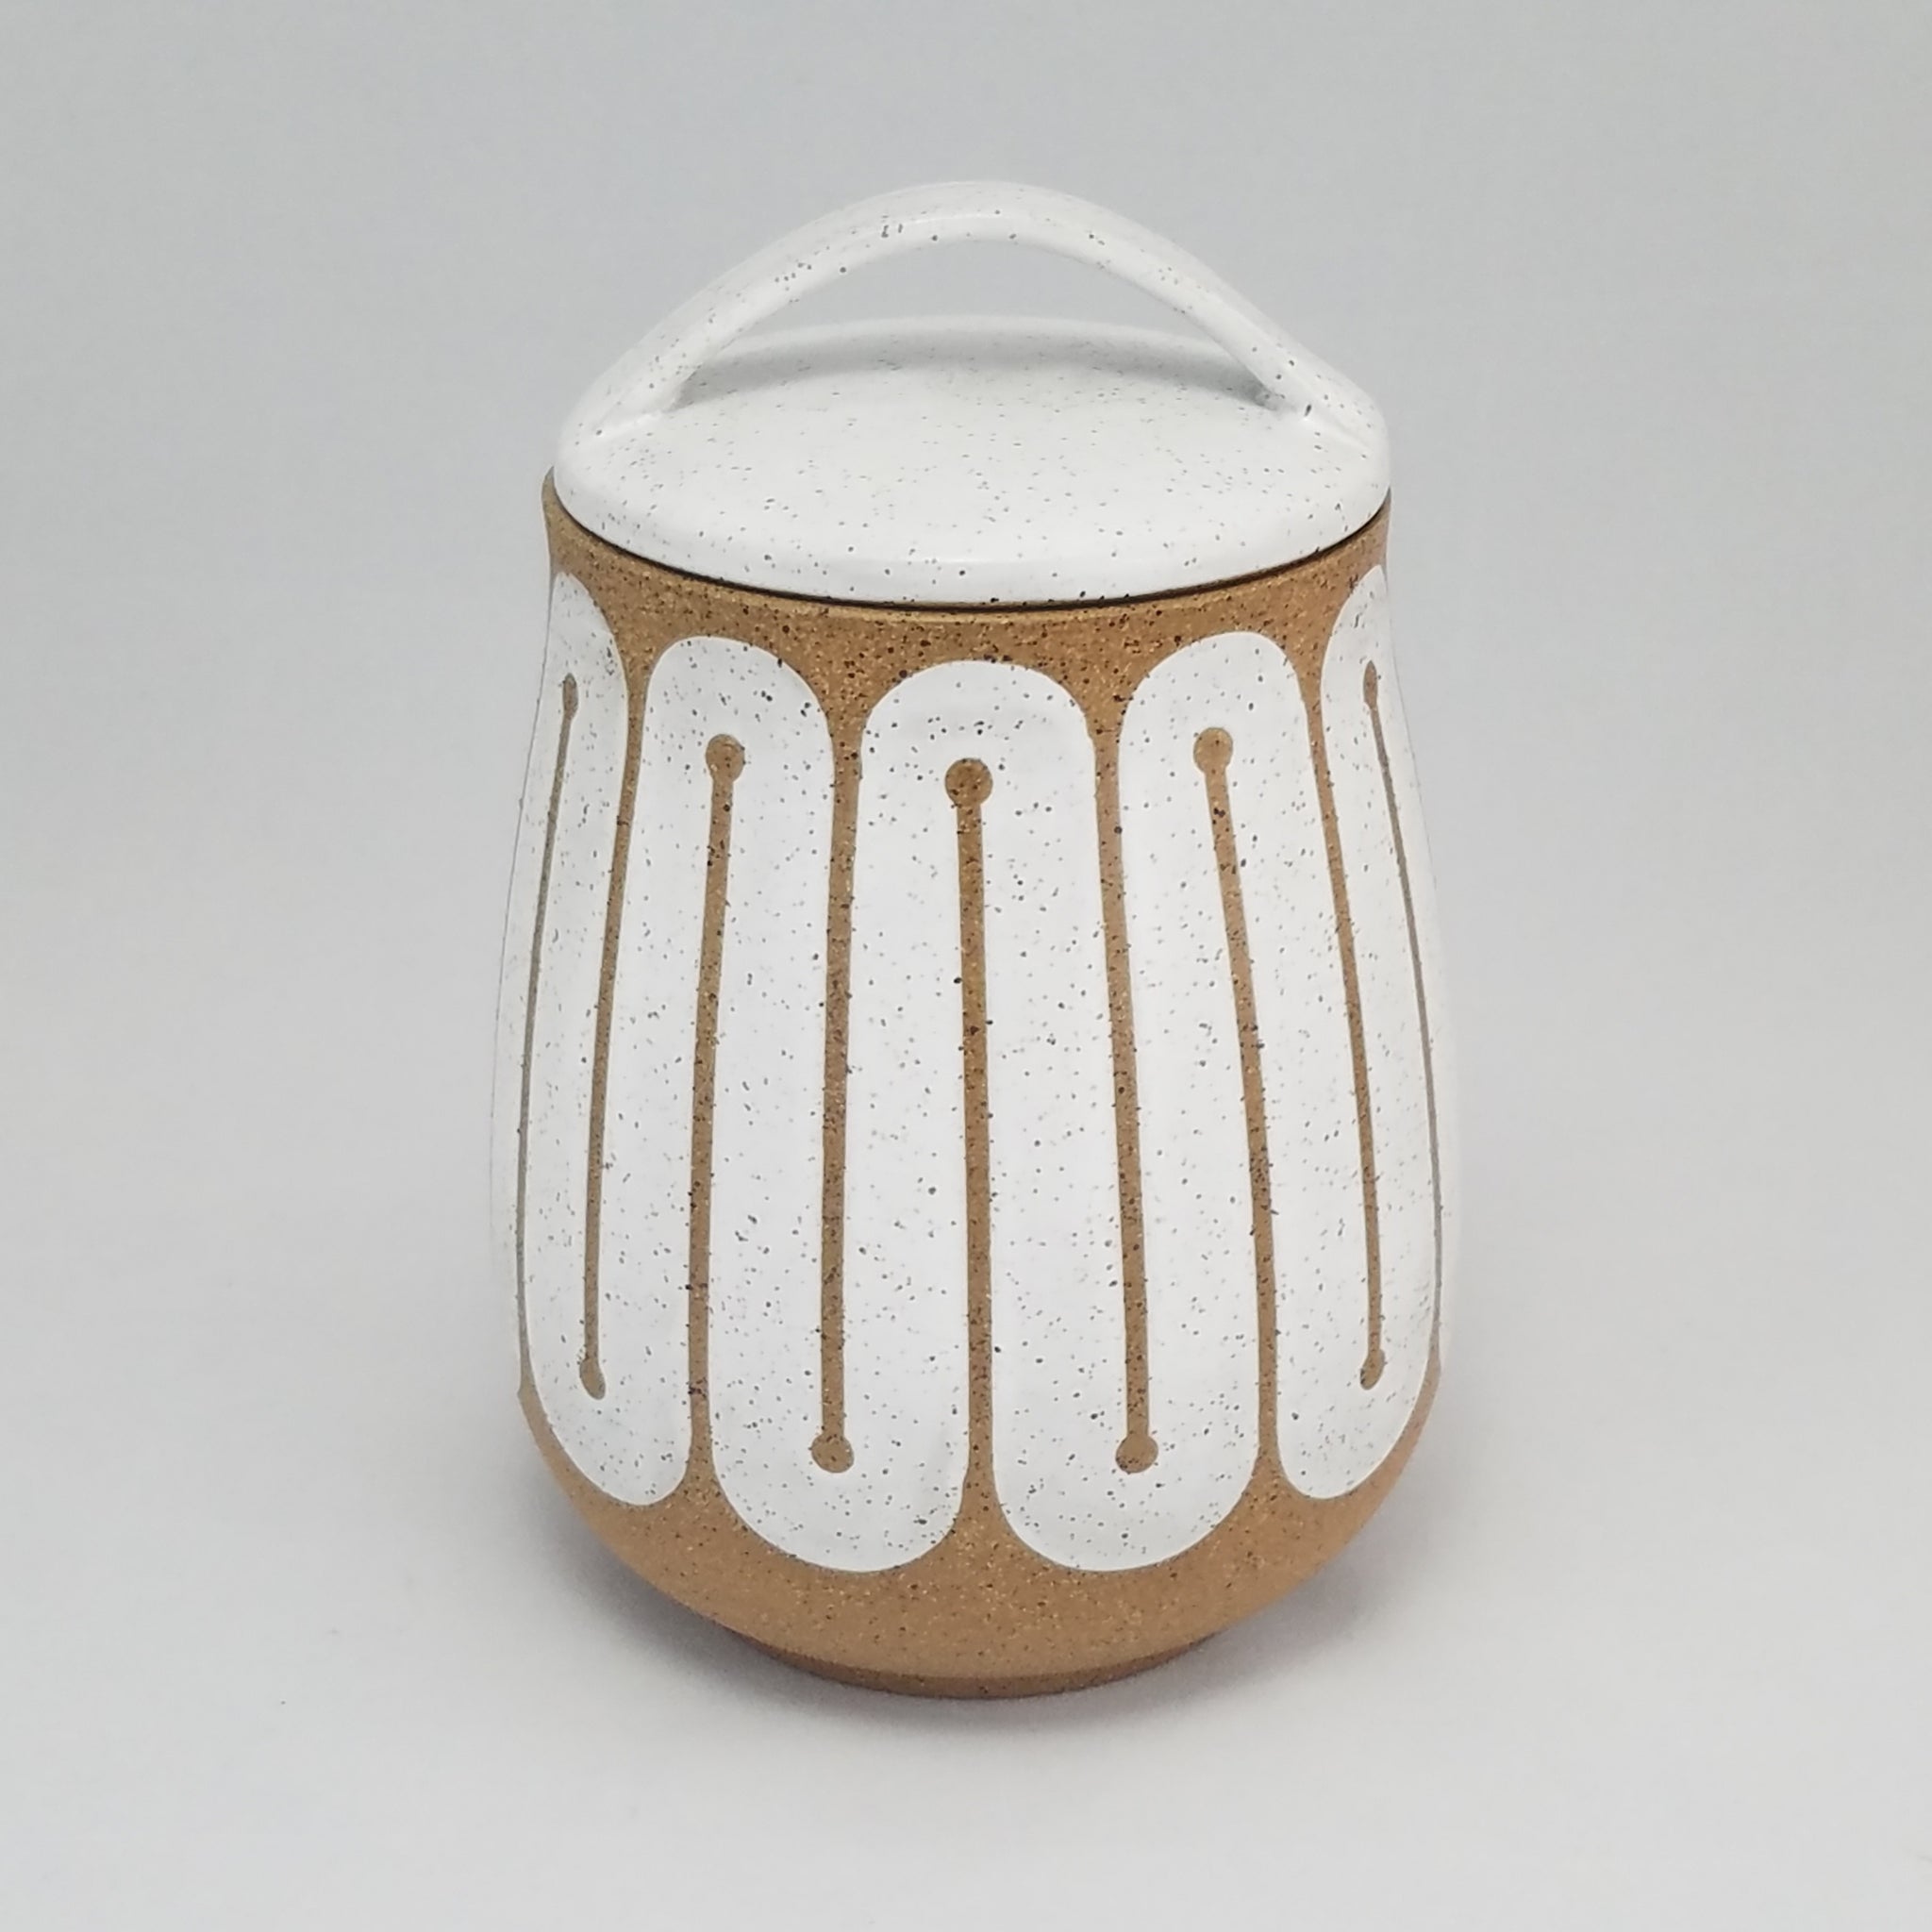 Jar with White Glaze on Speckled Clay (8 in / 20 cm tall)